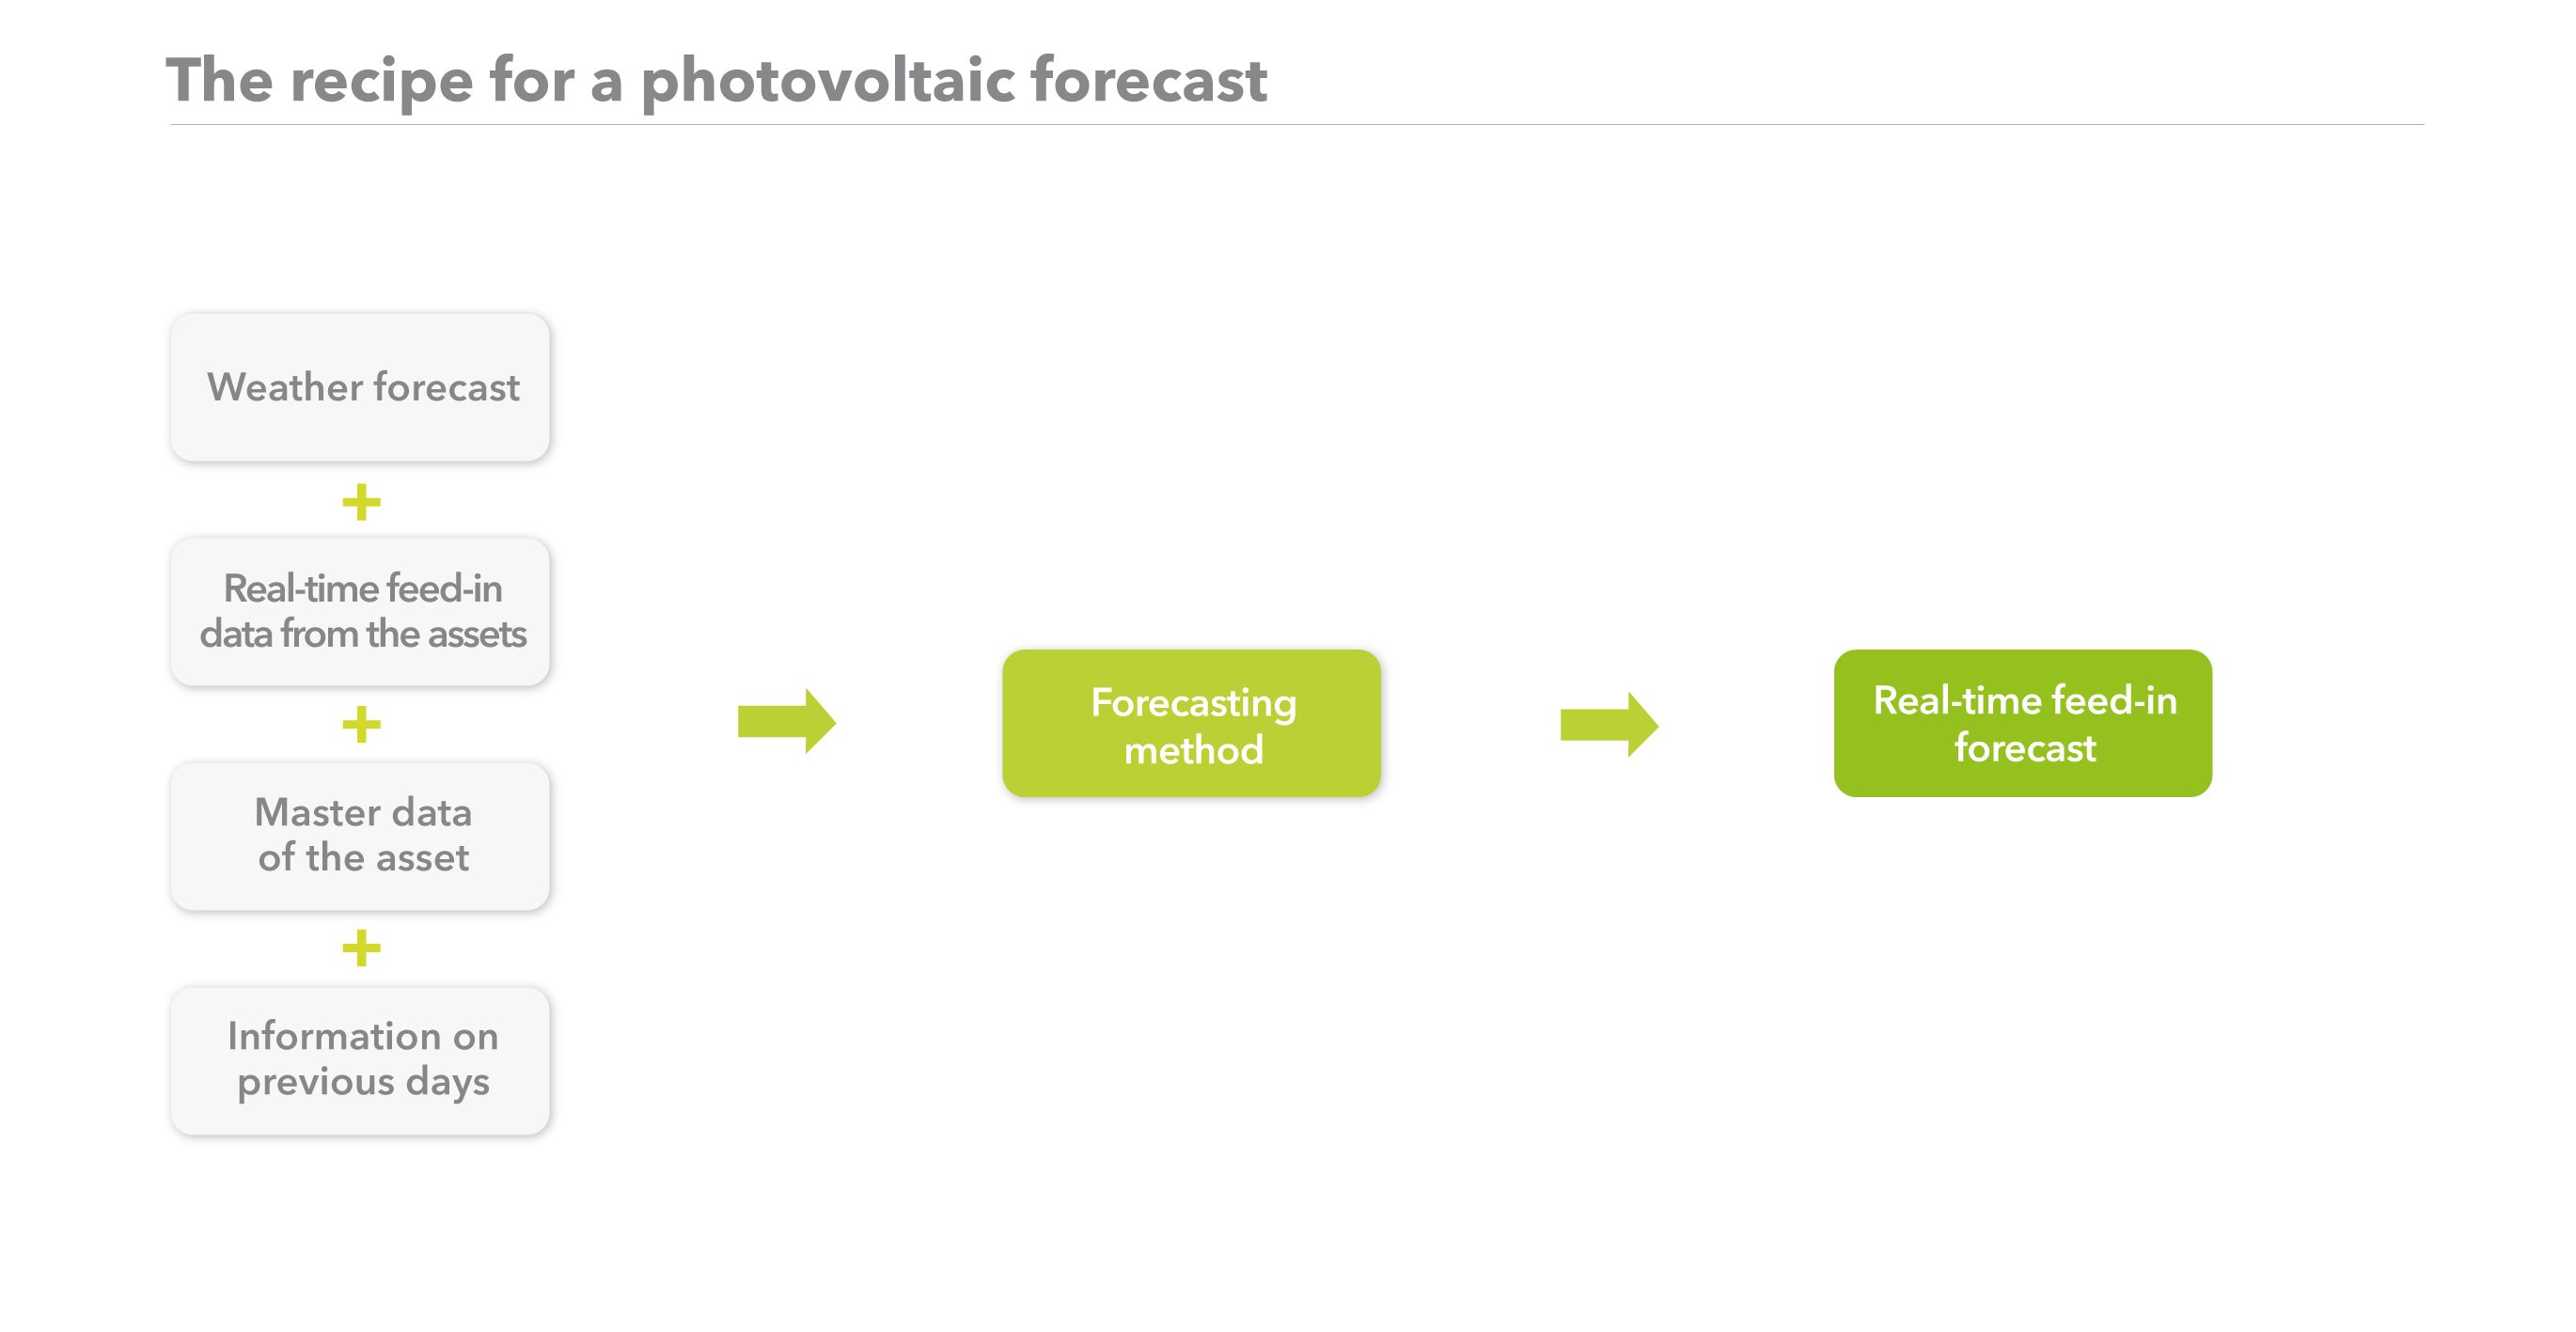 This is how forecasting of photovoltaic feed-in works.